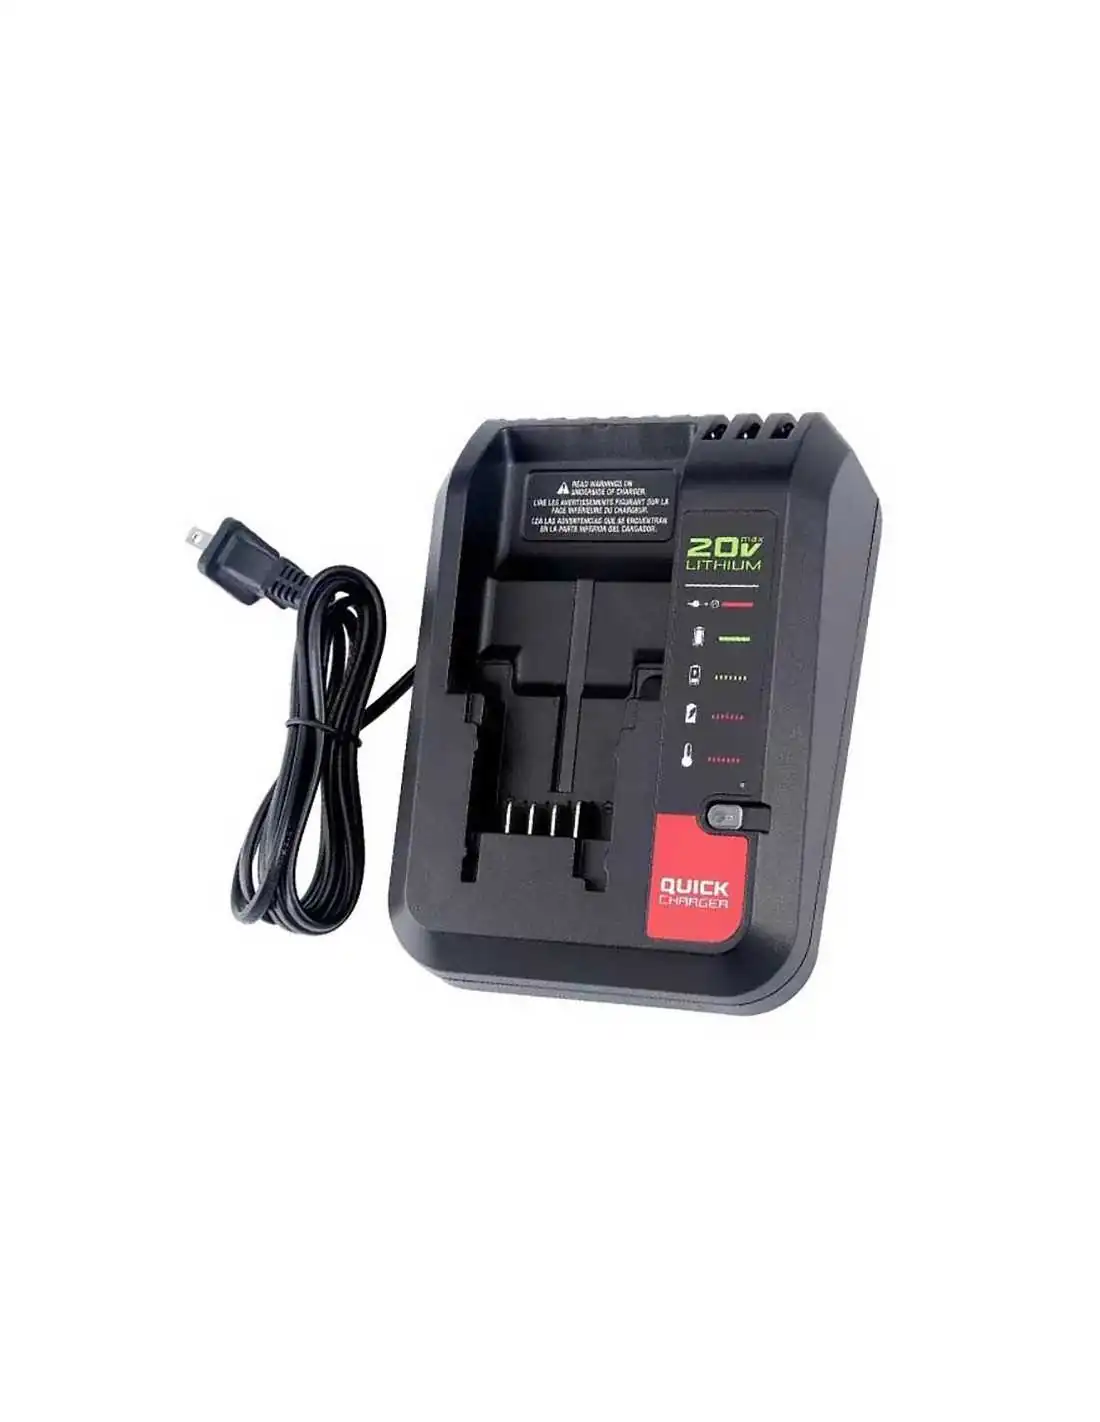 https://www.batteryer.co.uk/6831-thickbox_default/for-black-deckerporter-cable-108v-20v-pcc692l-li-ion-battery-charger-replacement.jpg